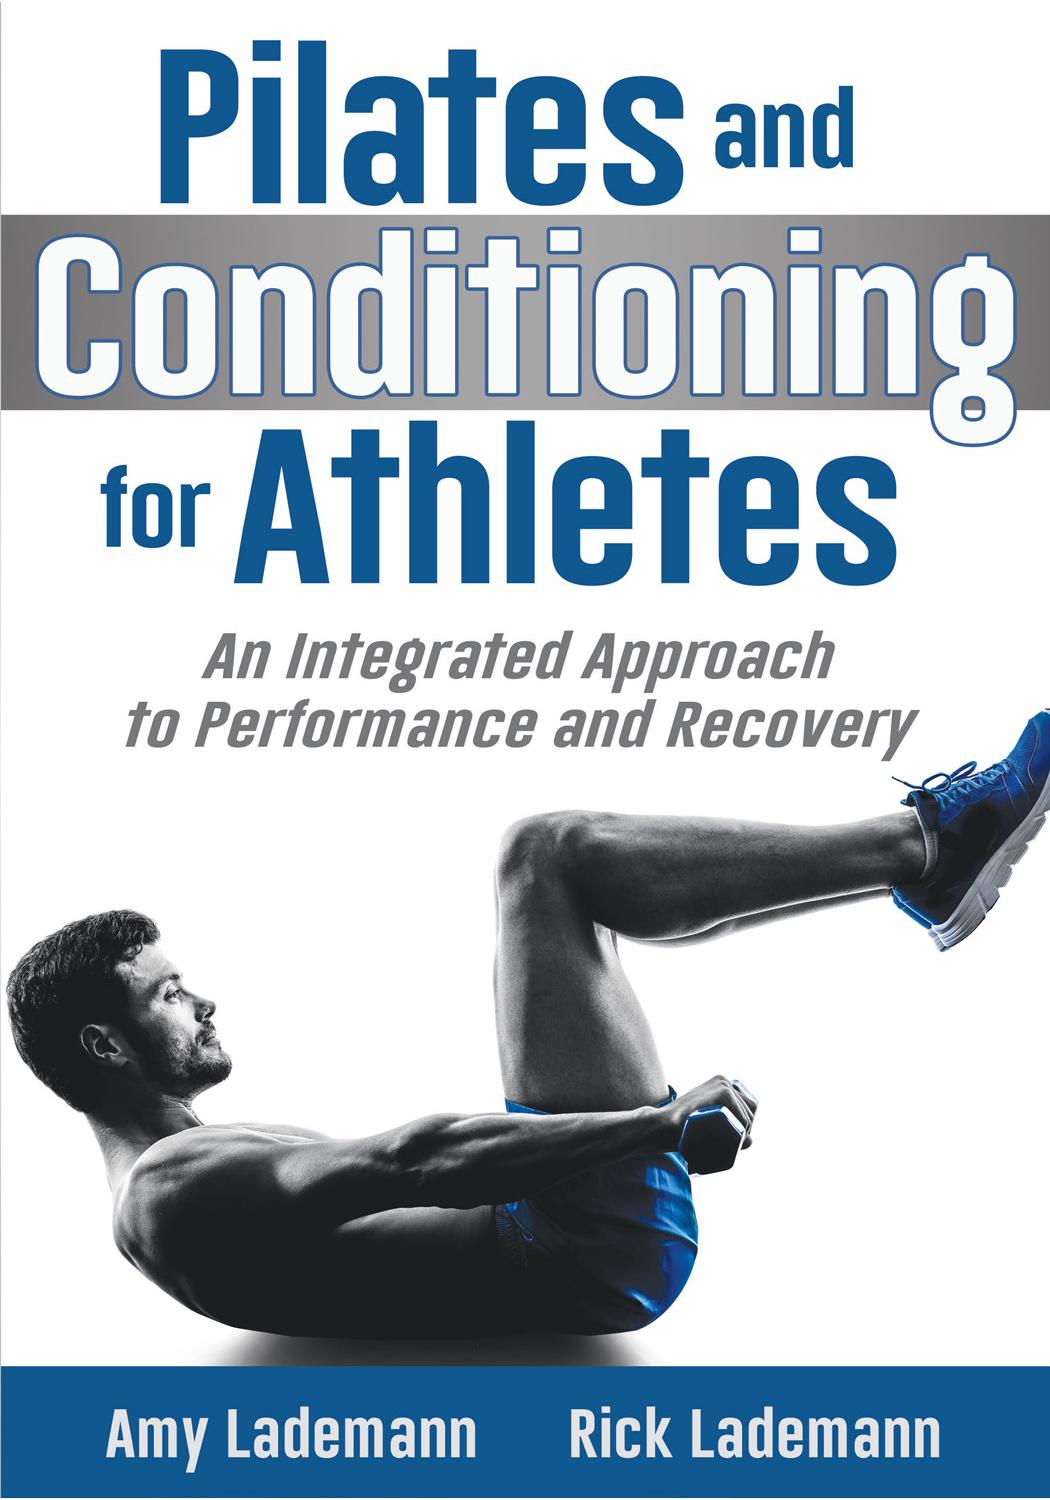 Pilates and Conditioning for Athletes by Amy Lademann